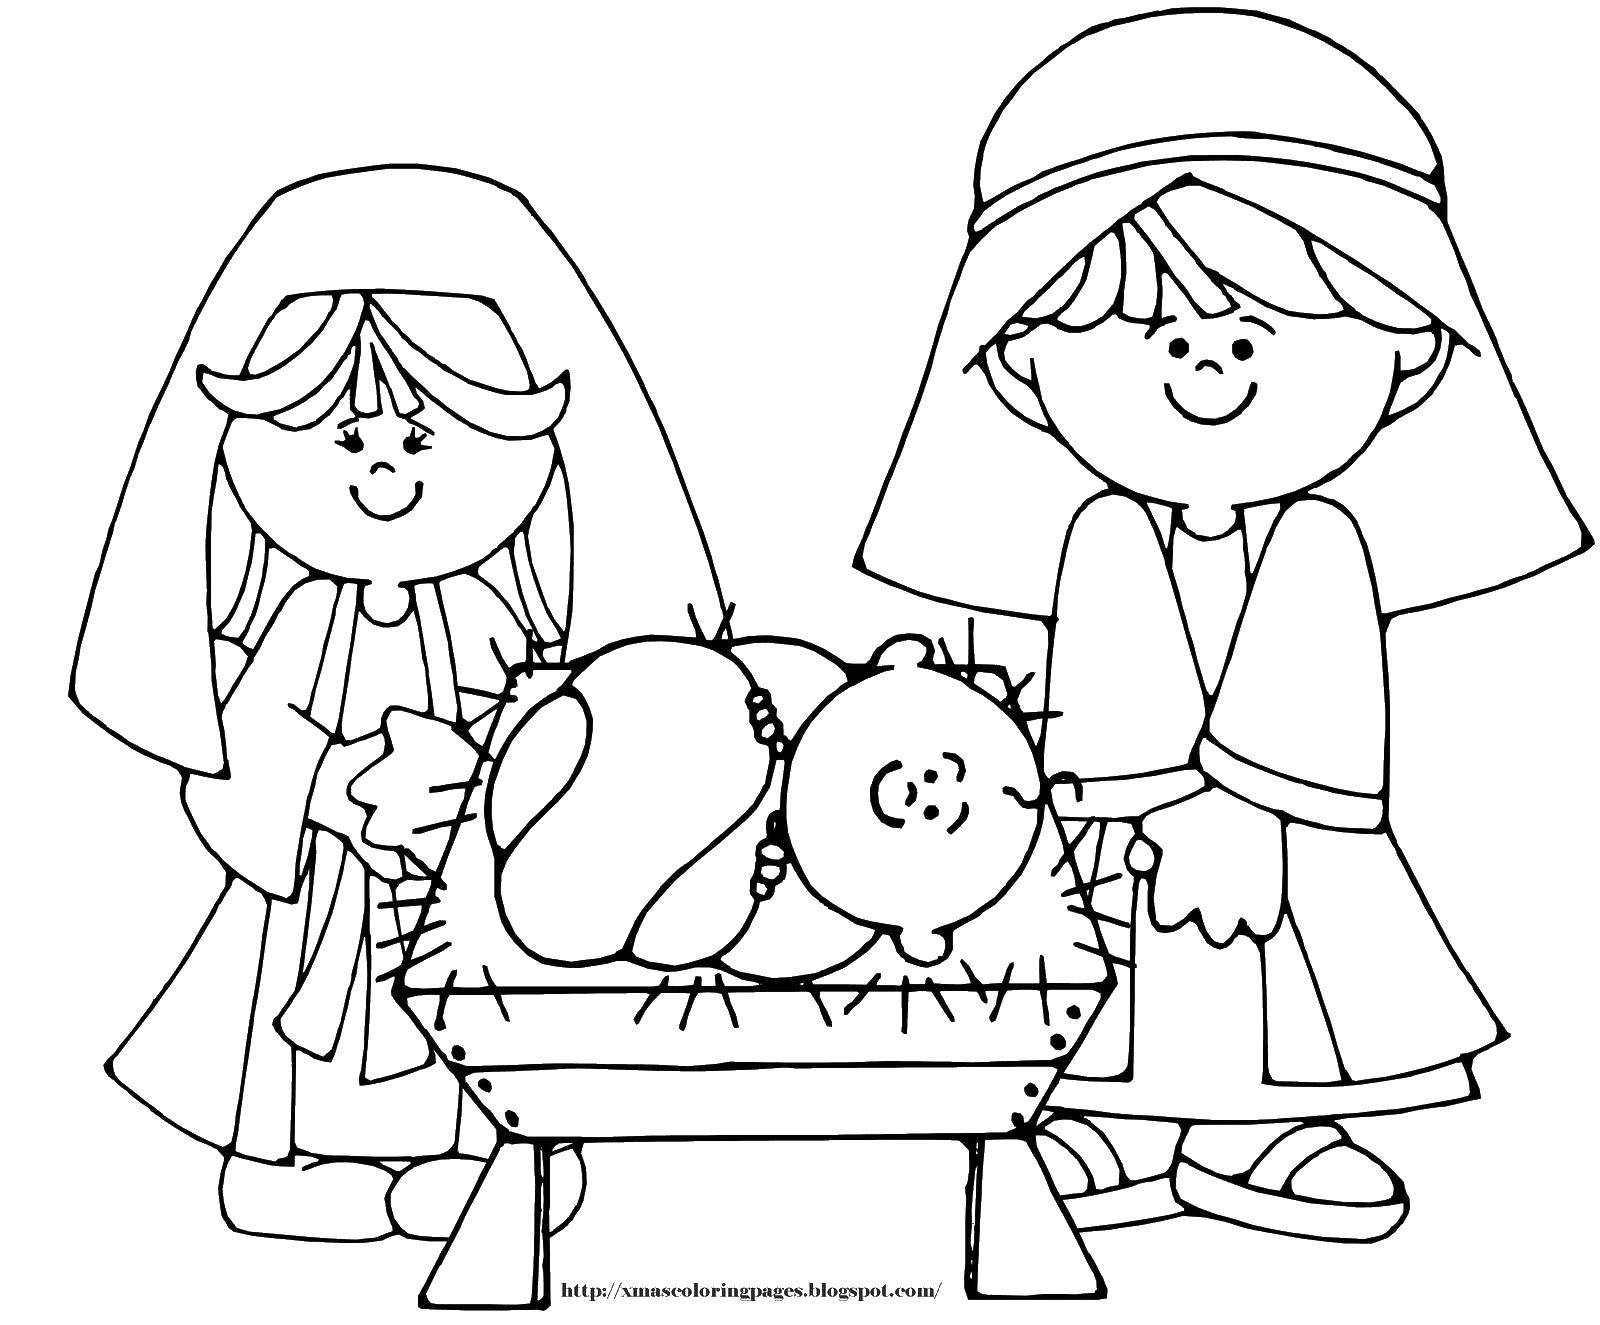 Coloring Jesus birth. Category Religion. Tags:  Jesus, the Bible.